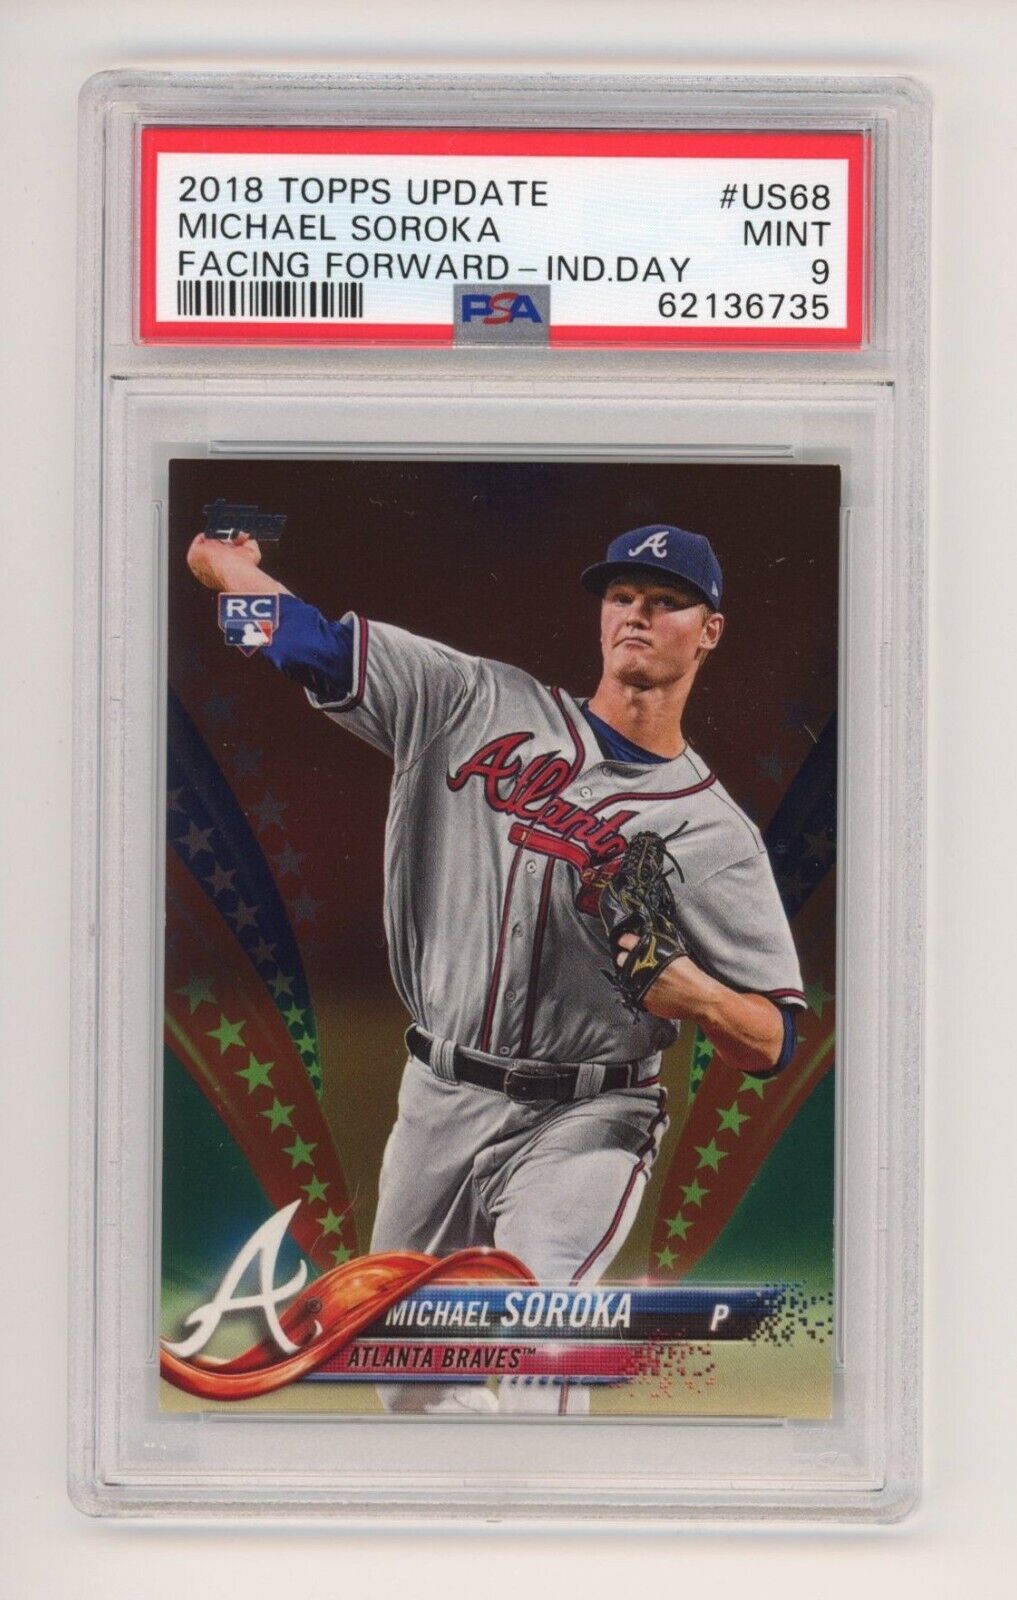 MIKE SOROKA RC 2018 Topps Update US68 INDEPENDENCE DAY 65/76 PSA 9 MINT - BRAVES